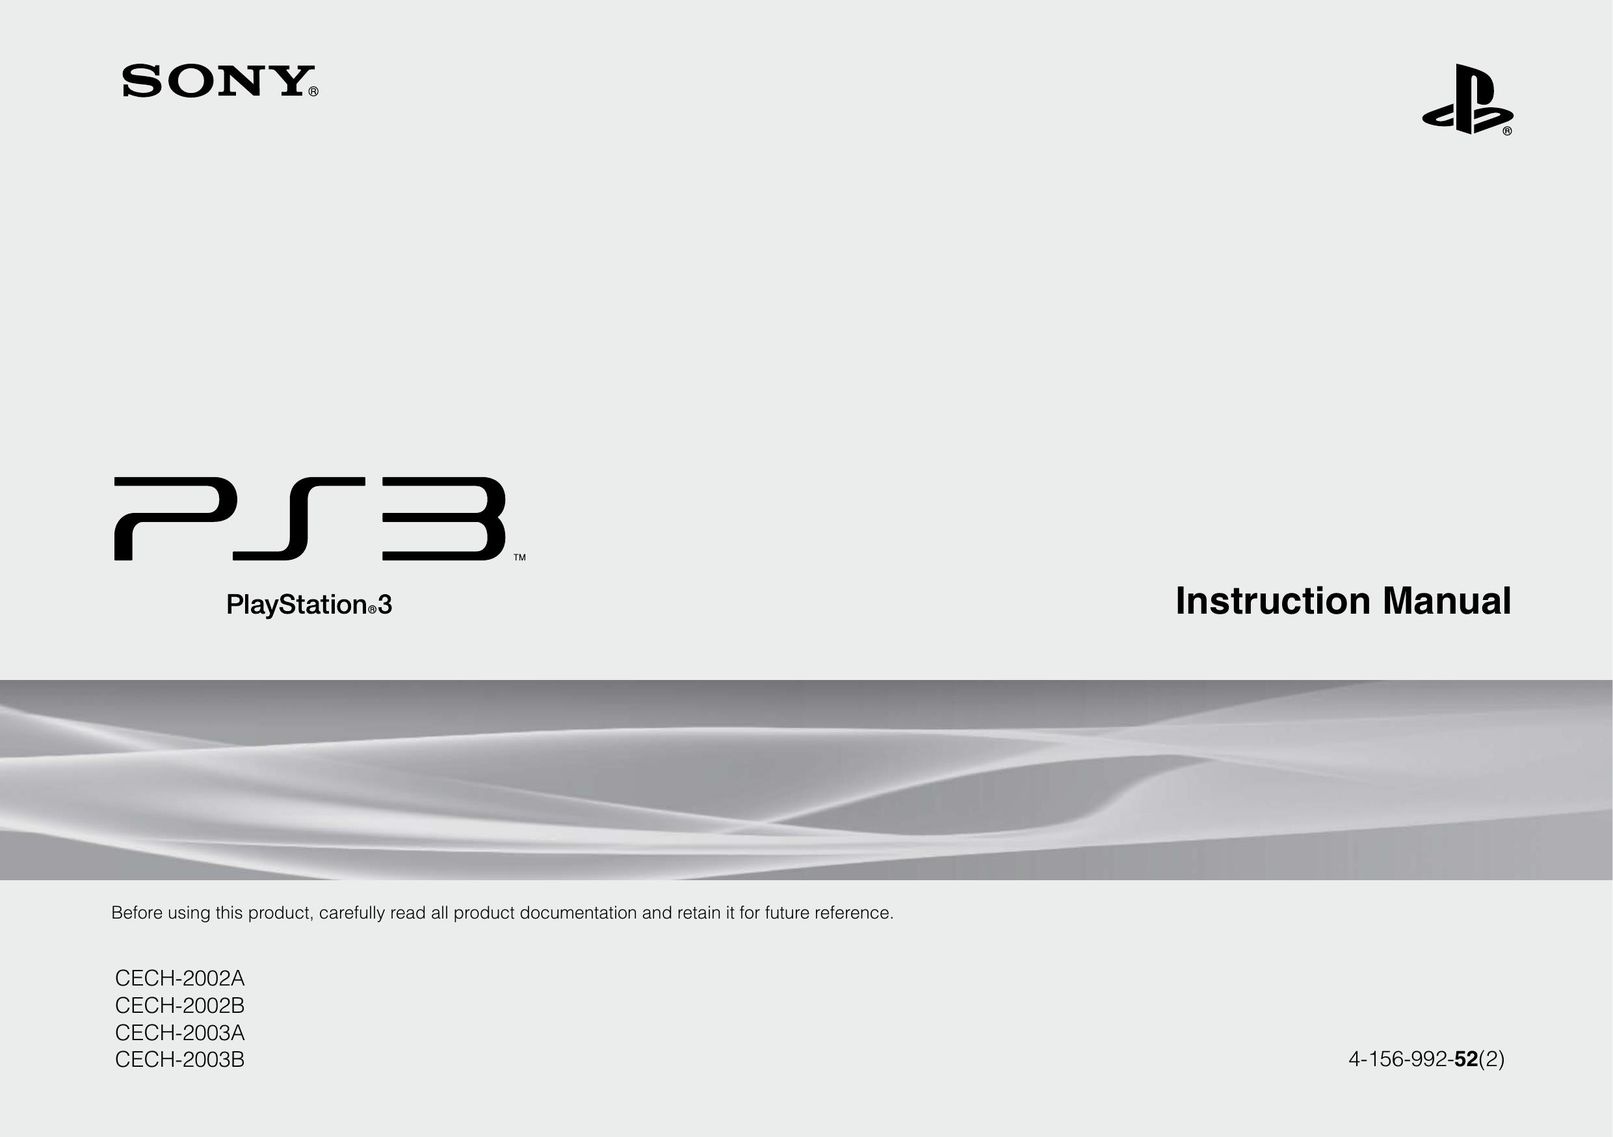 Sony CECH-2003A Video Game Console User Manual